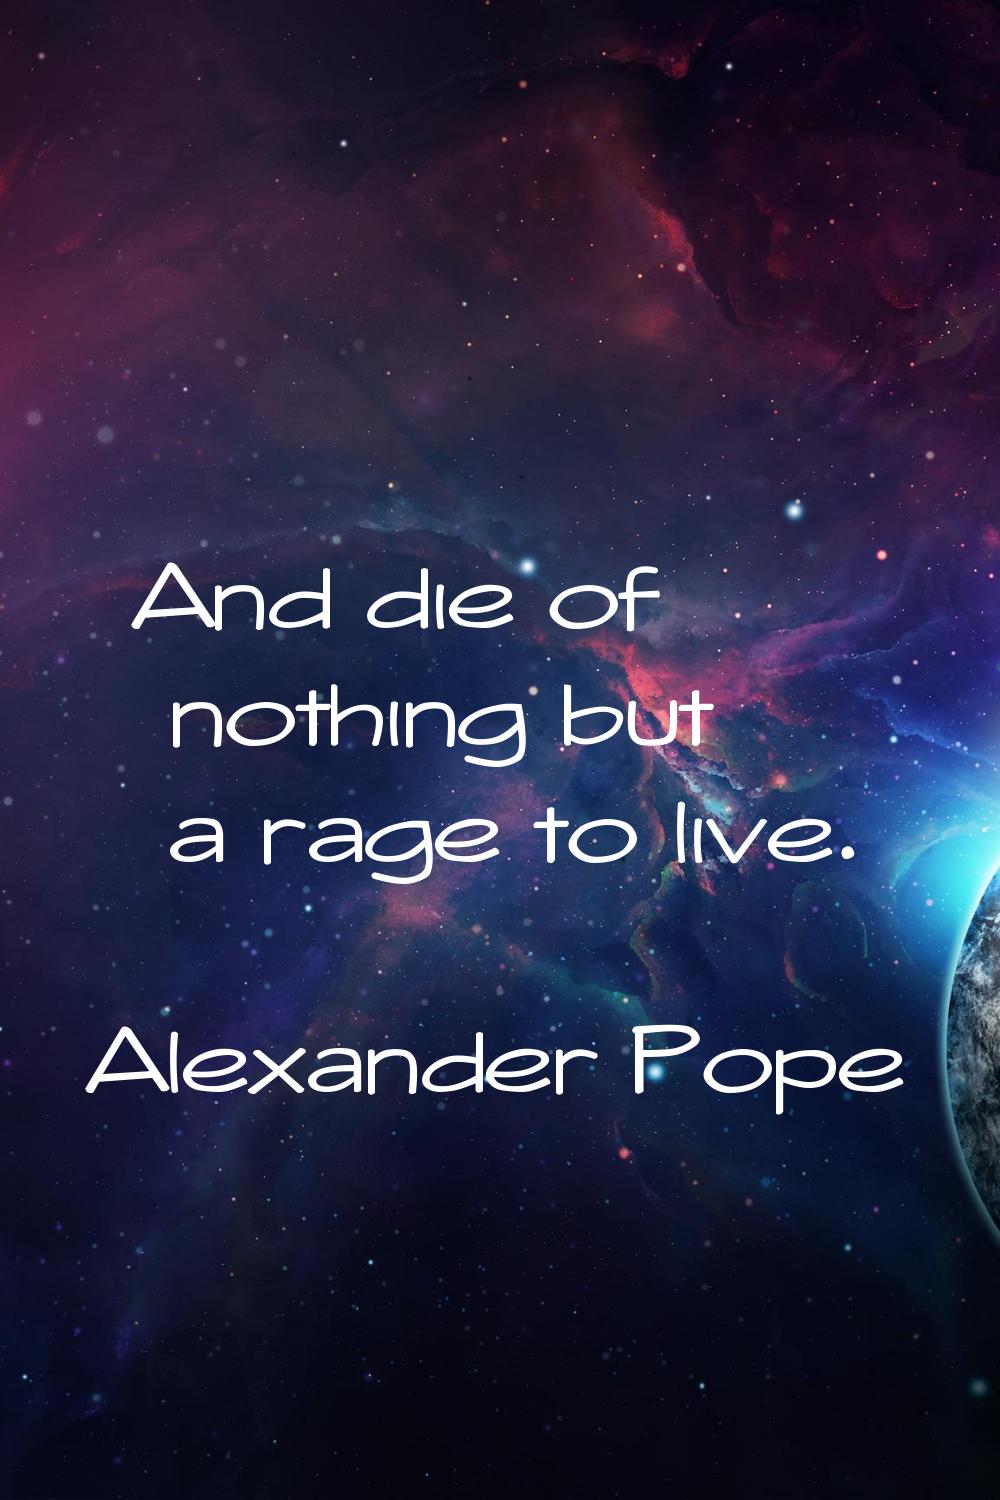 And die of nothing but a rage to live.